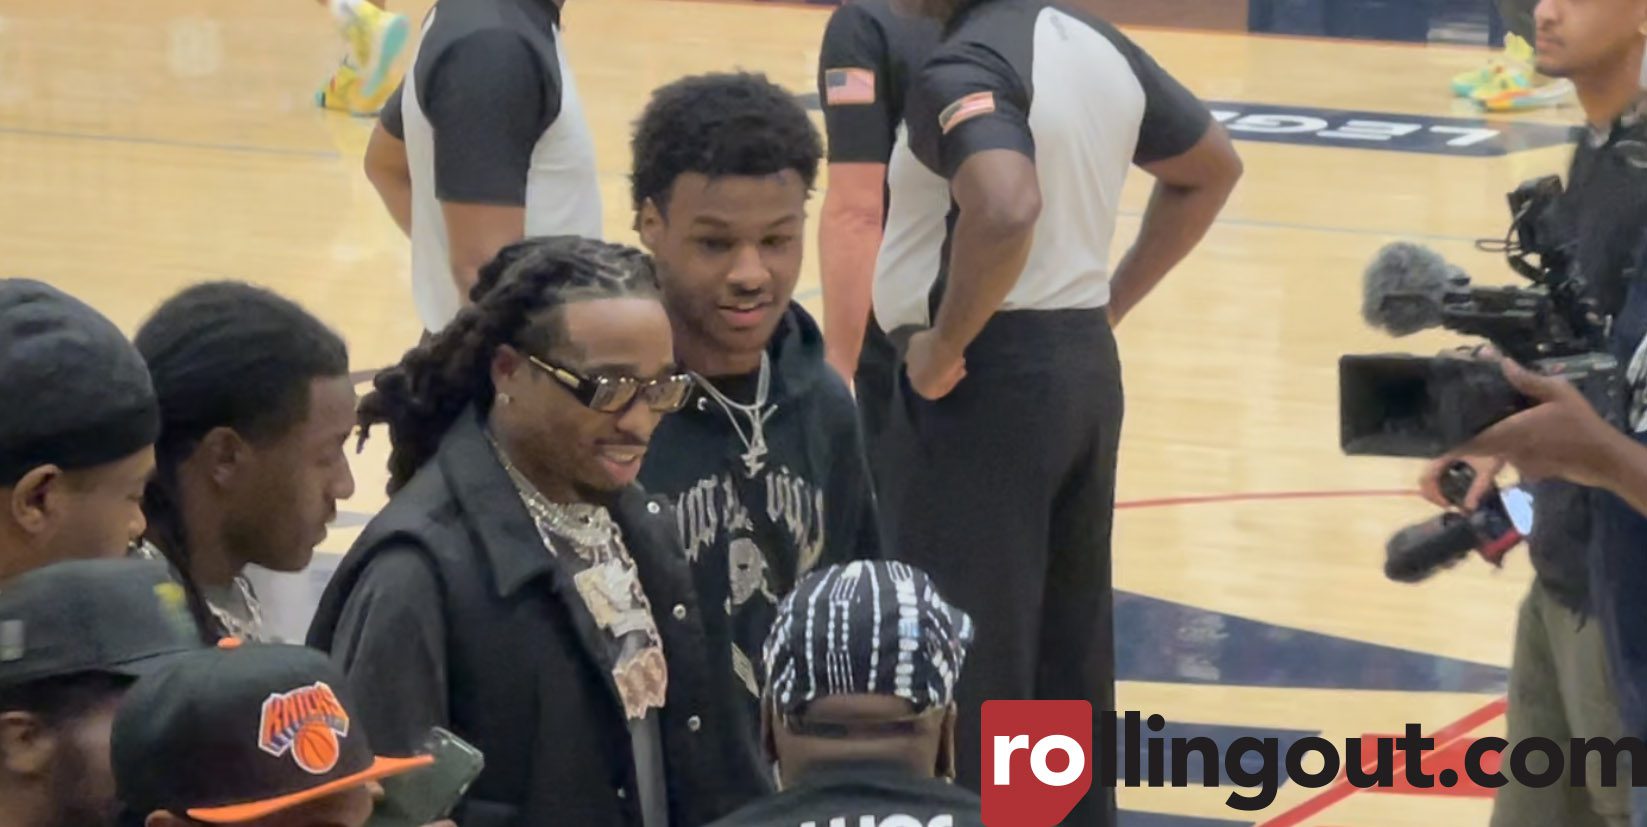 Bronny James nets colossal income as the top NIL earner in the nation